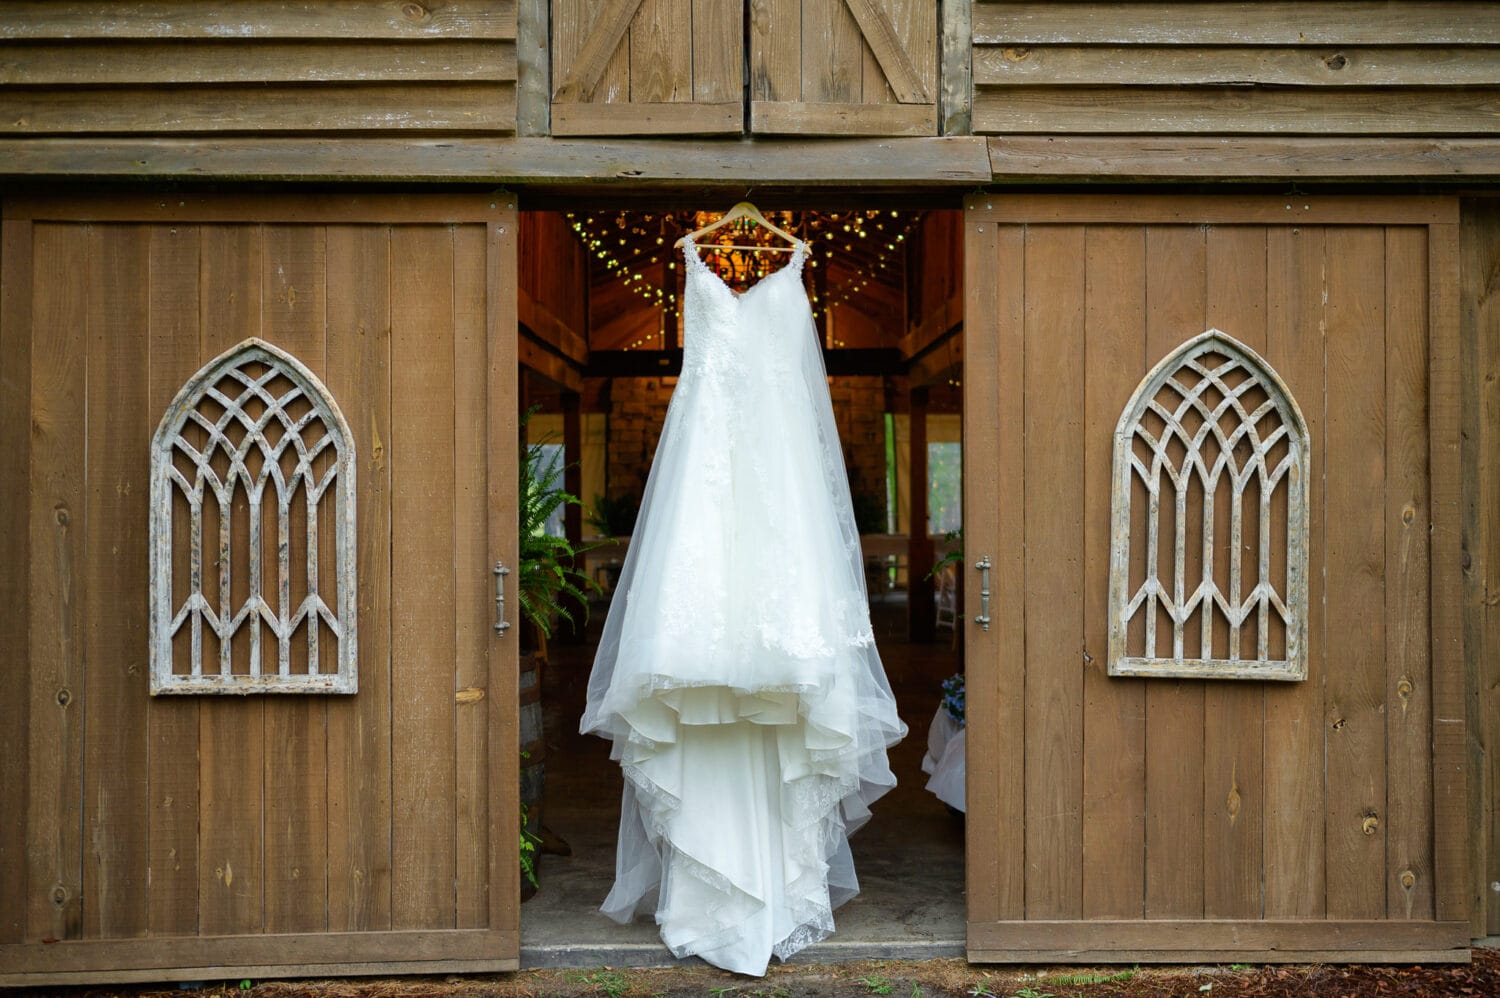 Wedding dress hanging in the barn - Wildhorse at Parker Farms